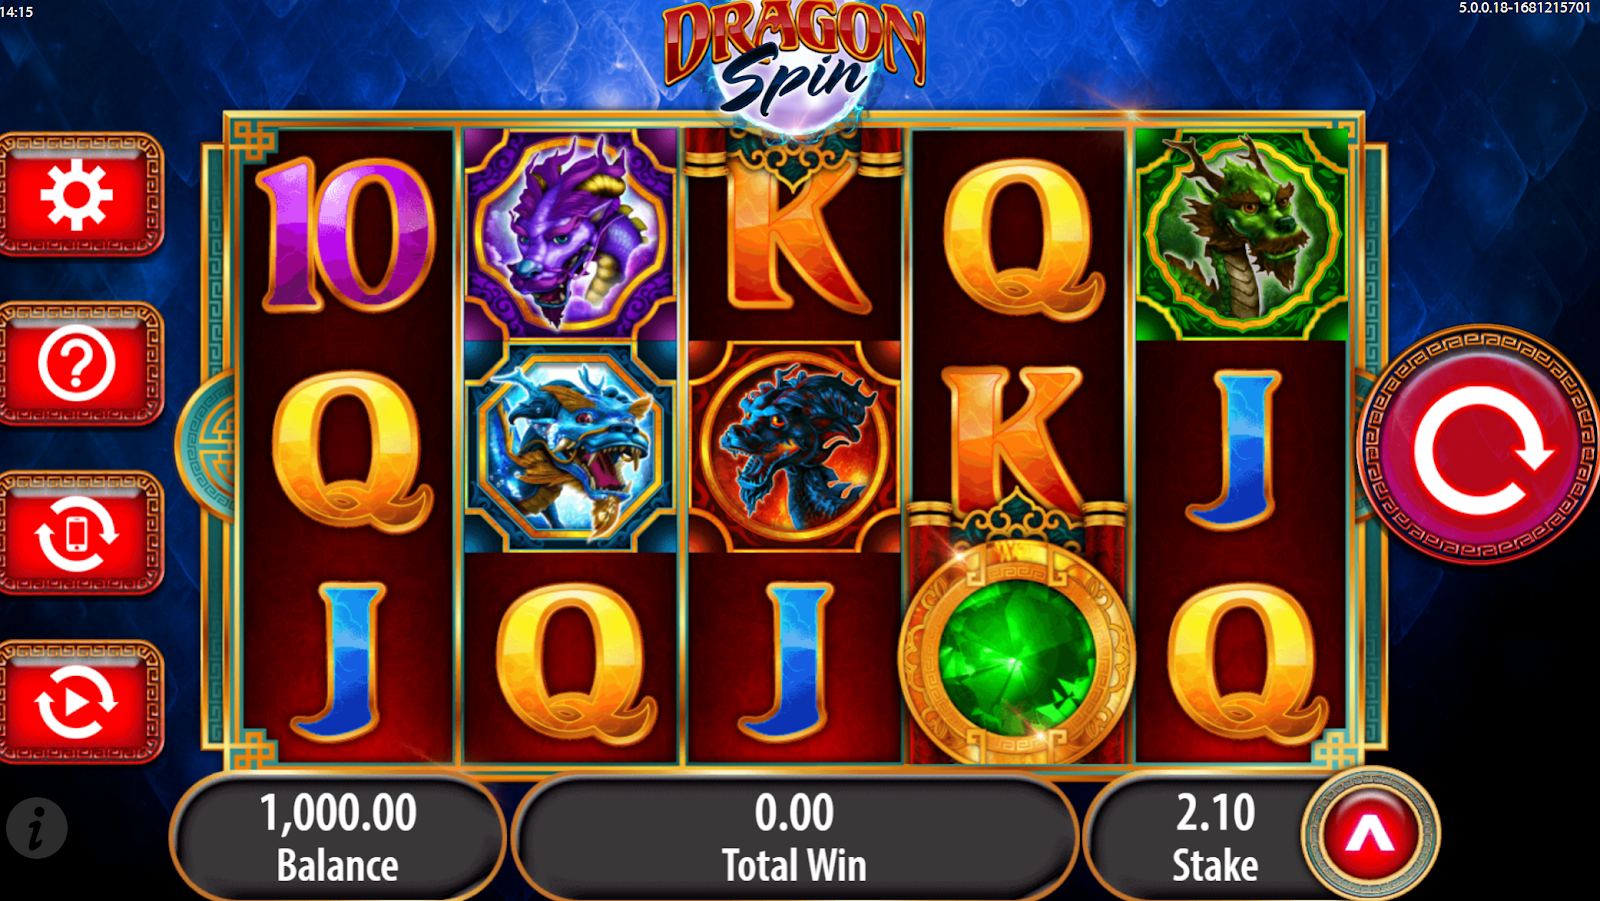 A screenshot of a dragon slots game at resorts casino with symbols of different coloured dragons and letters. 